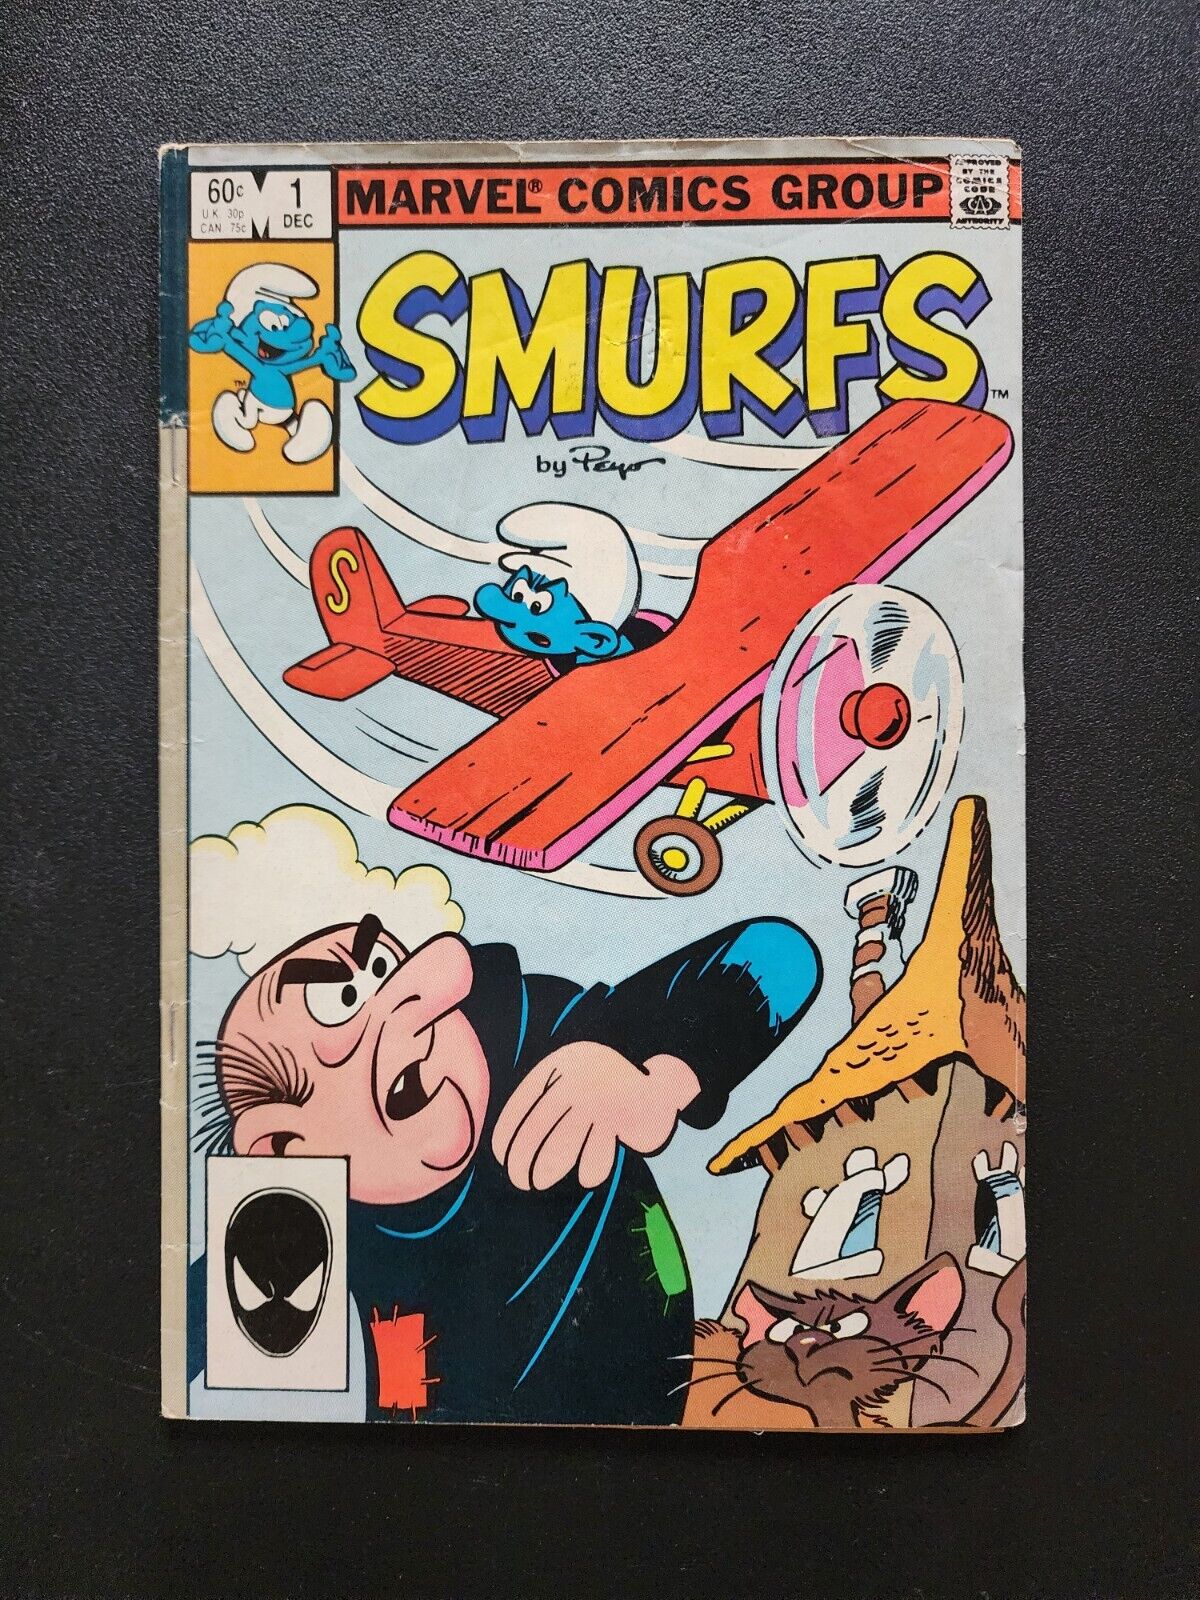 Marvel Comics Smurfs #1 January 1982 Pierre Culliford Cover Rough Condition